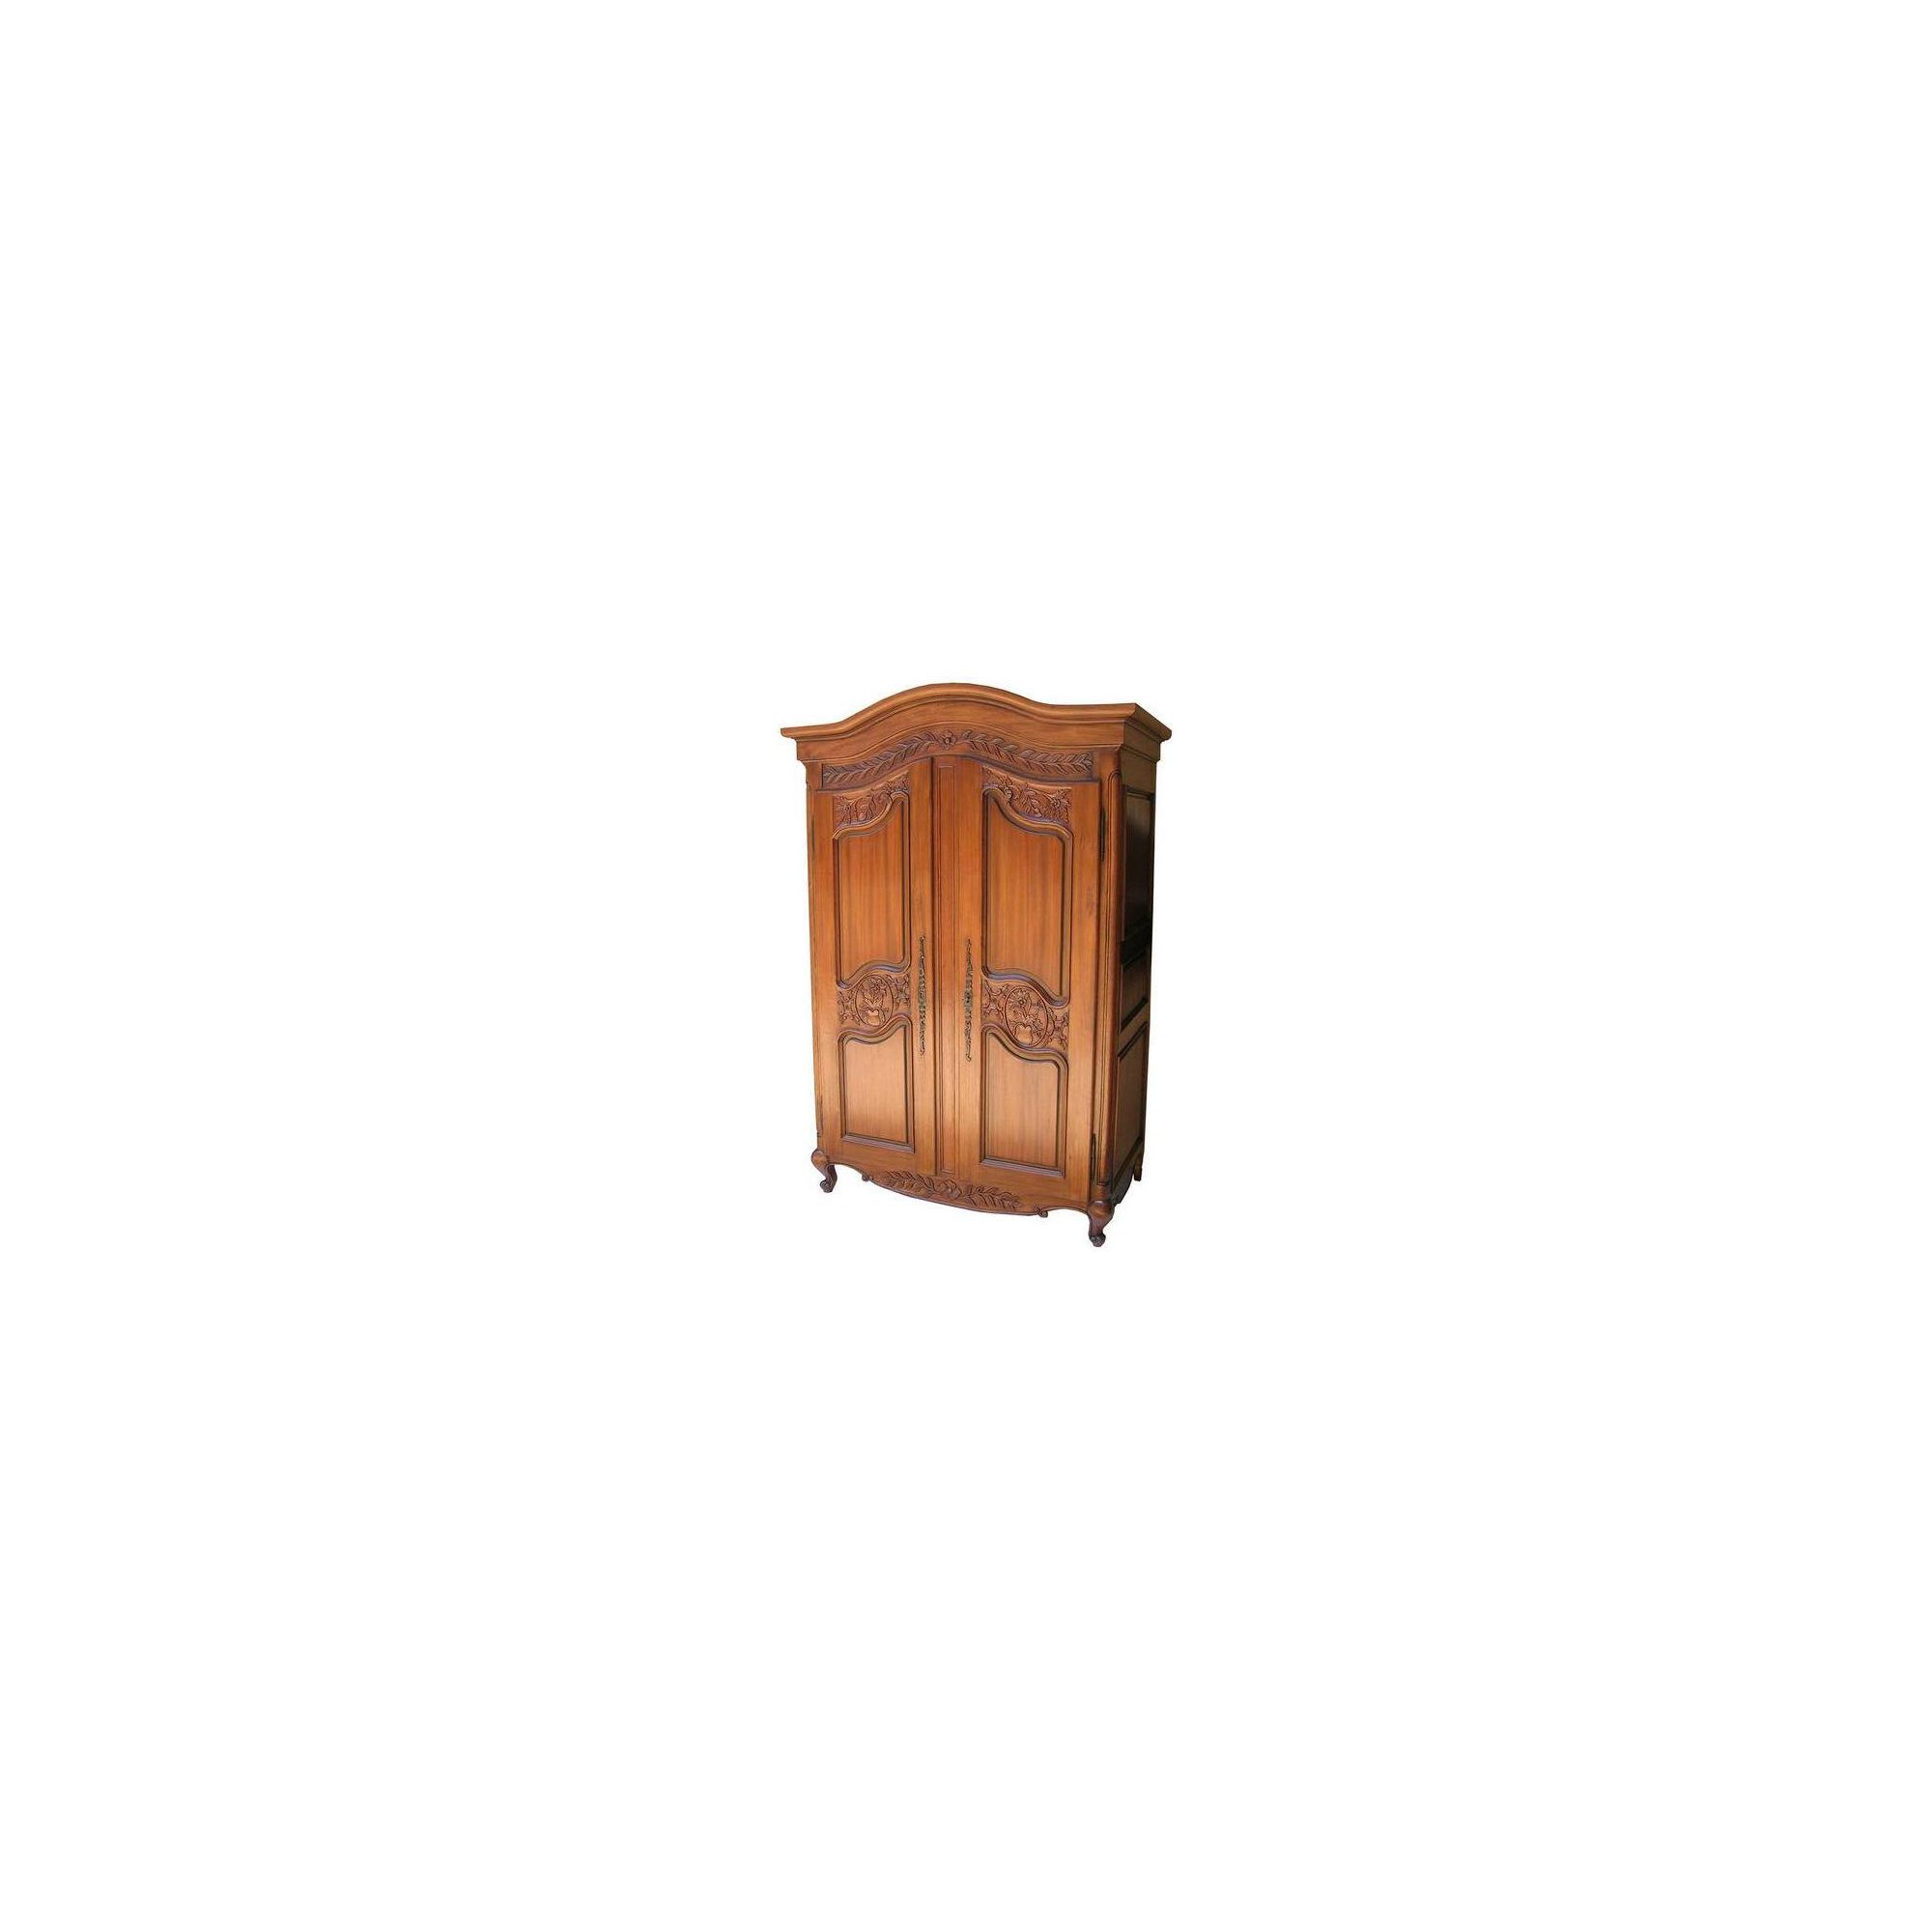 Lock stock and barrel Mahogany Arch Top Armoire with Carved Doors in Mahogany - Antique White at Tesco Direct